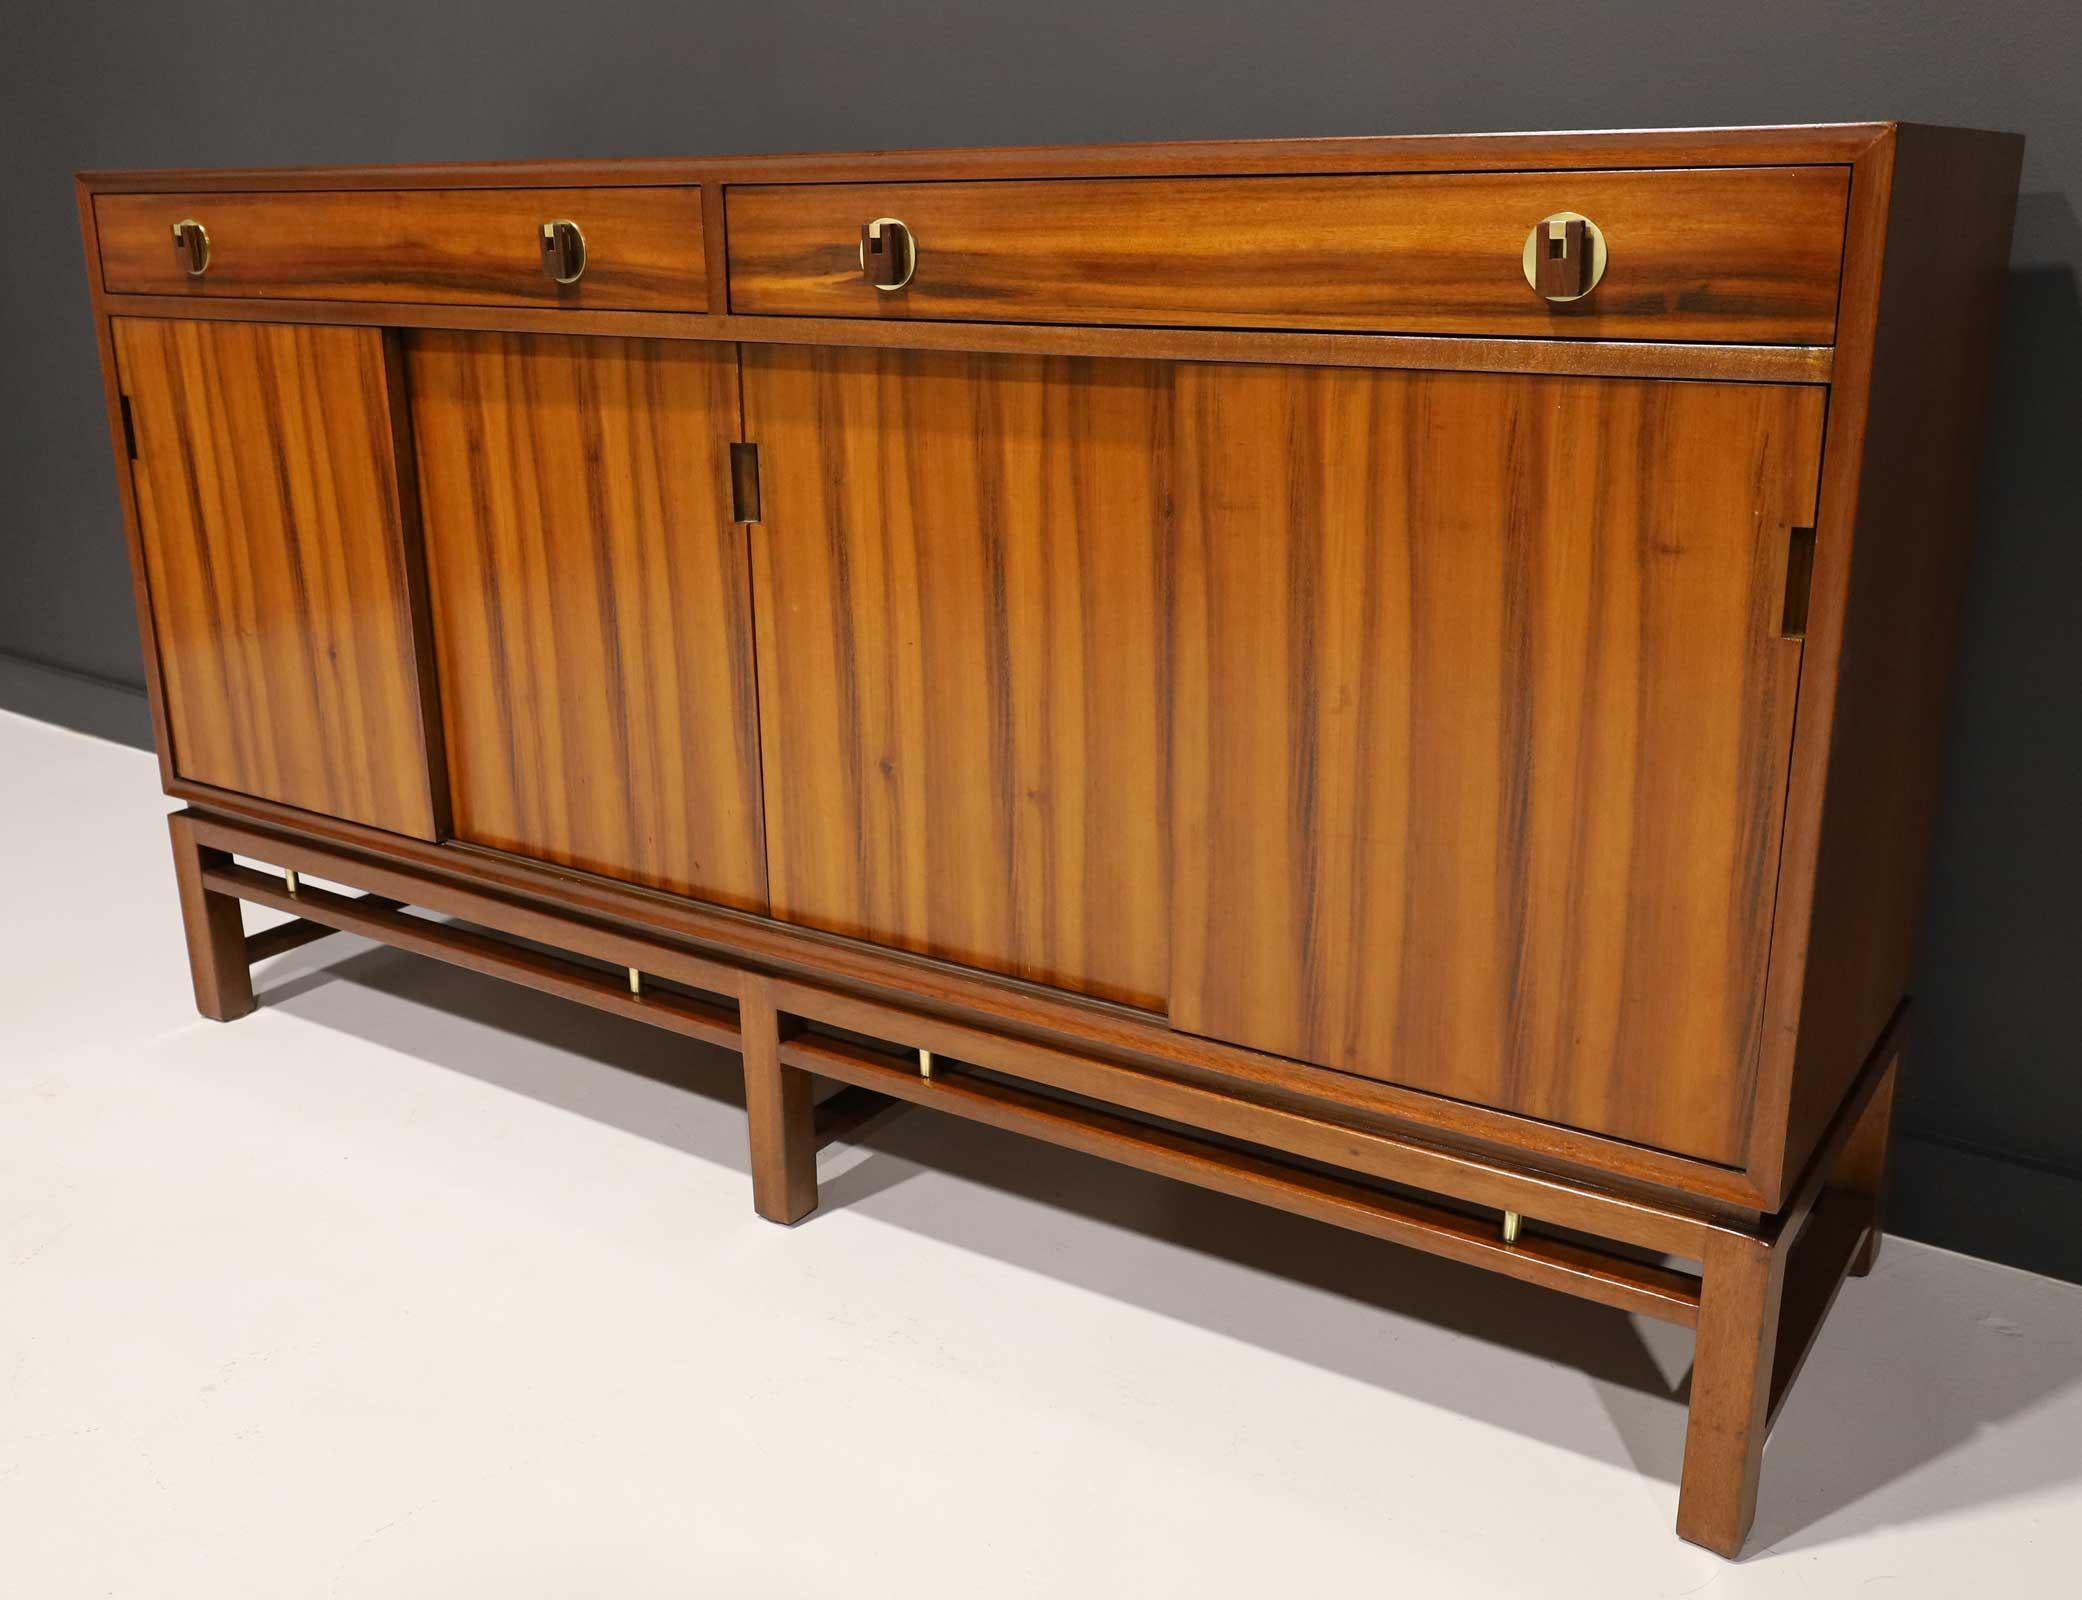 Not often seen, a fully restored sliding door sideboard by Edward Wormley for Dunbar. The cabinet features four sliding doors with loads of interior storage. The top section has two drawers each with two brass and wood decorative knobs. Brass trim